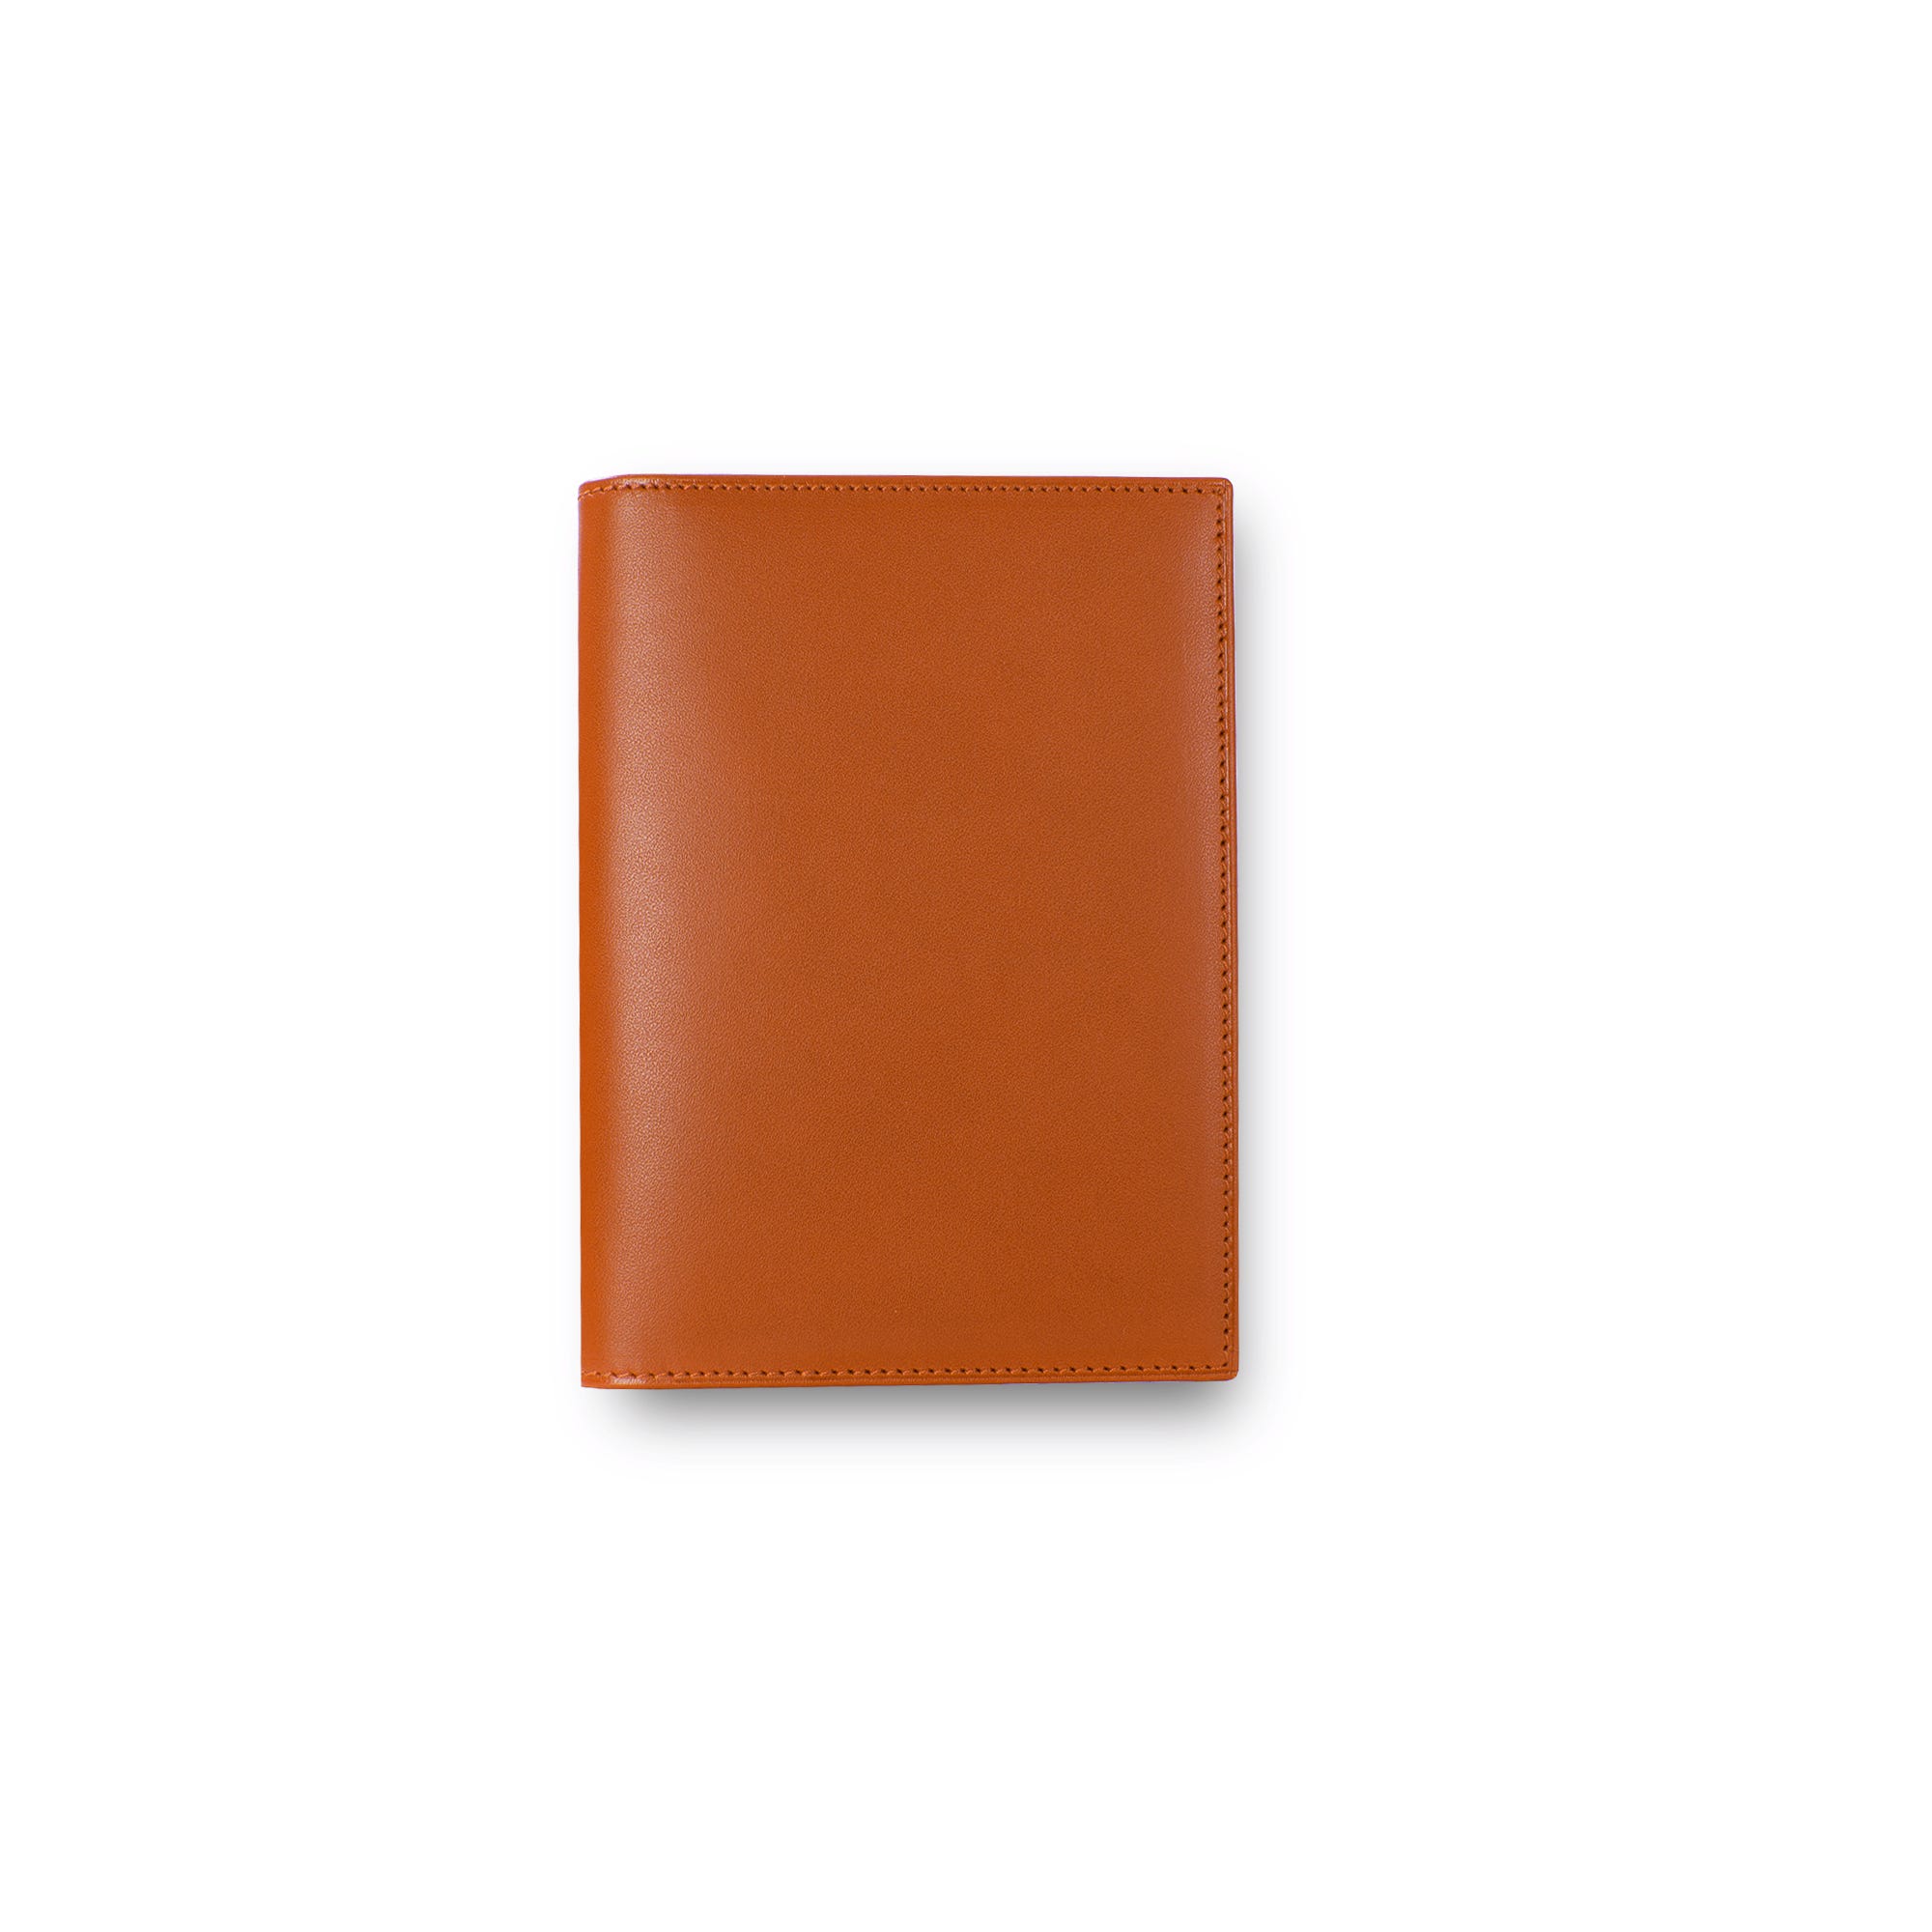 Hanover Passport Case in Saddle Leather